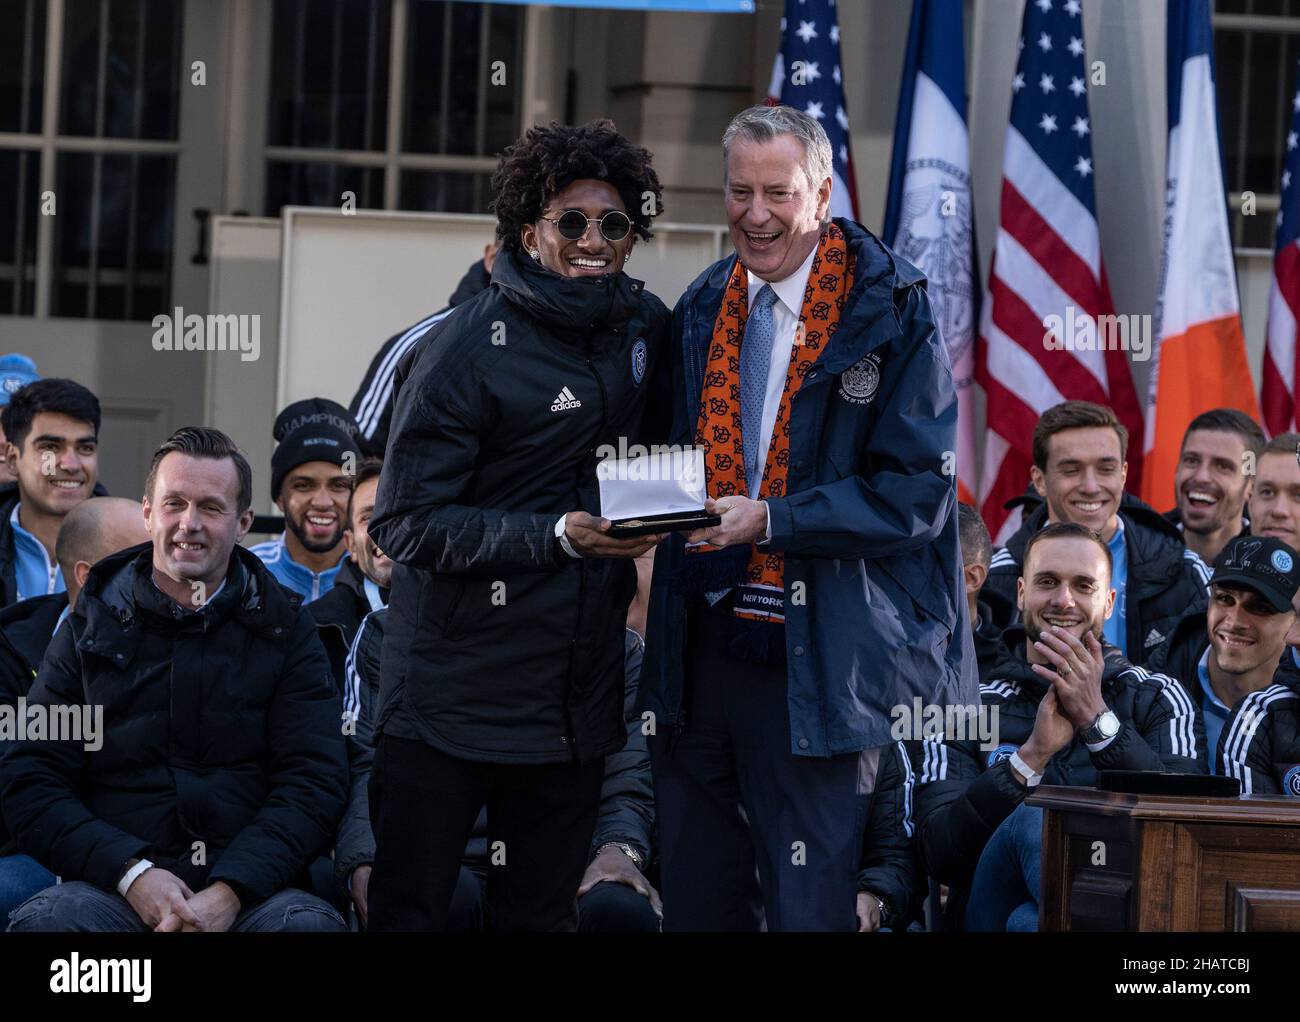 New York, USA. 14th Dec, 2021. Forward Talles Magno received Keys to the City from mayor Bill de Blasio during celebration for NYCFC winning the 2021 MLS Cup on City Hall steps in New York on December 14, 2021. NYCFC finished the regular season in 4th place and played almost all playoff games away. Winning the MLS Cup is the first trophy won by the franchise since it was established 7 years ago. NYCFC is part of the City Football Group which owns football clubs around the world. (Photo by Lev Radin/Sipa USA) Credit: Sipa USA/Alamy Live News Stock Photo